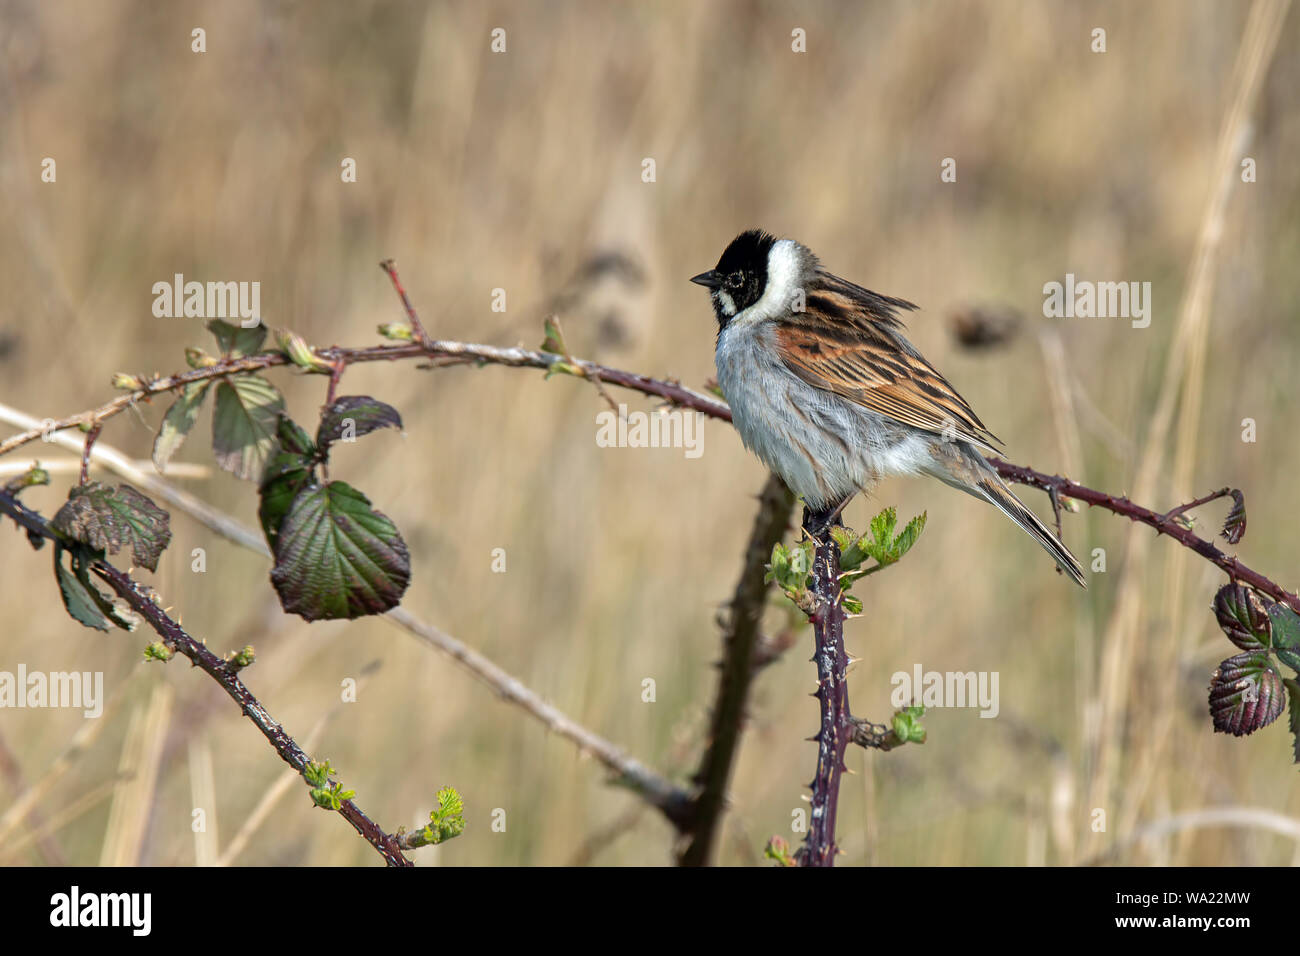 Male Reed Bunting perched on a thorny branch with space for copy Stock Photo